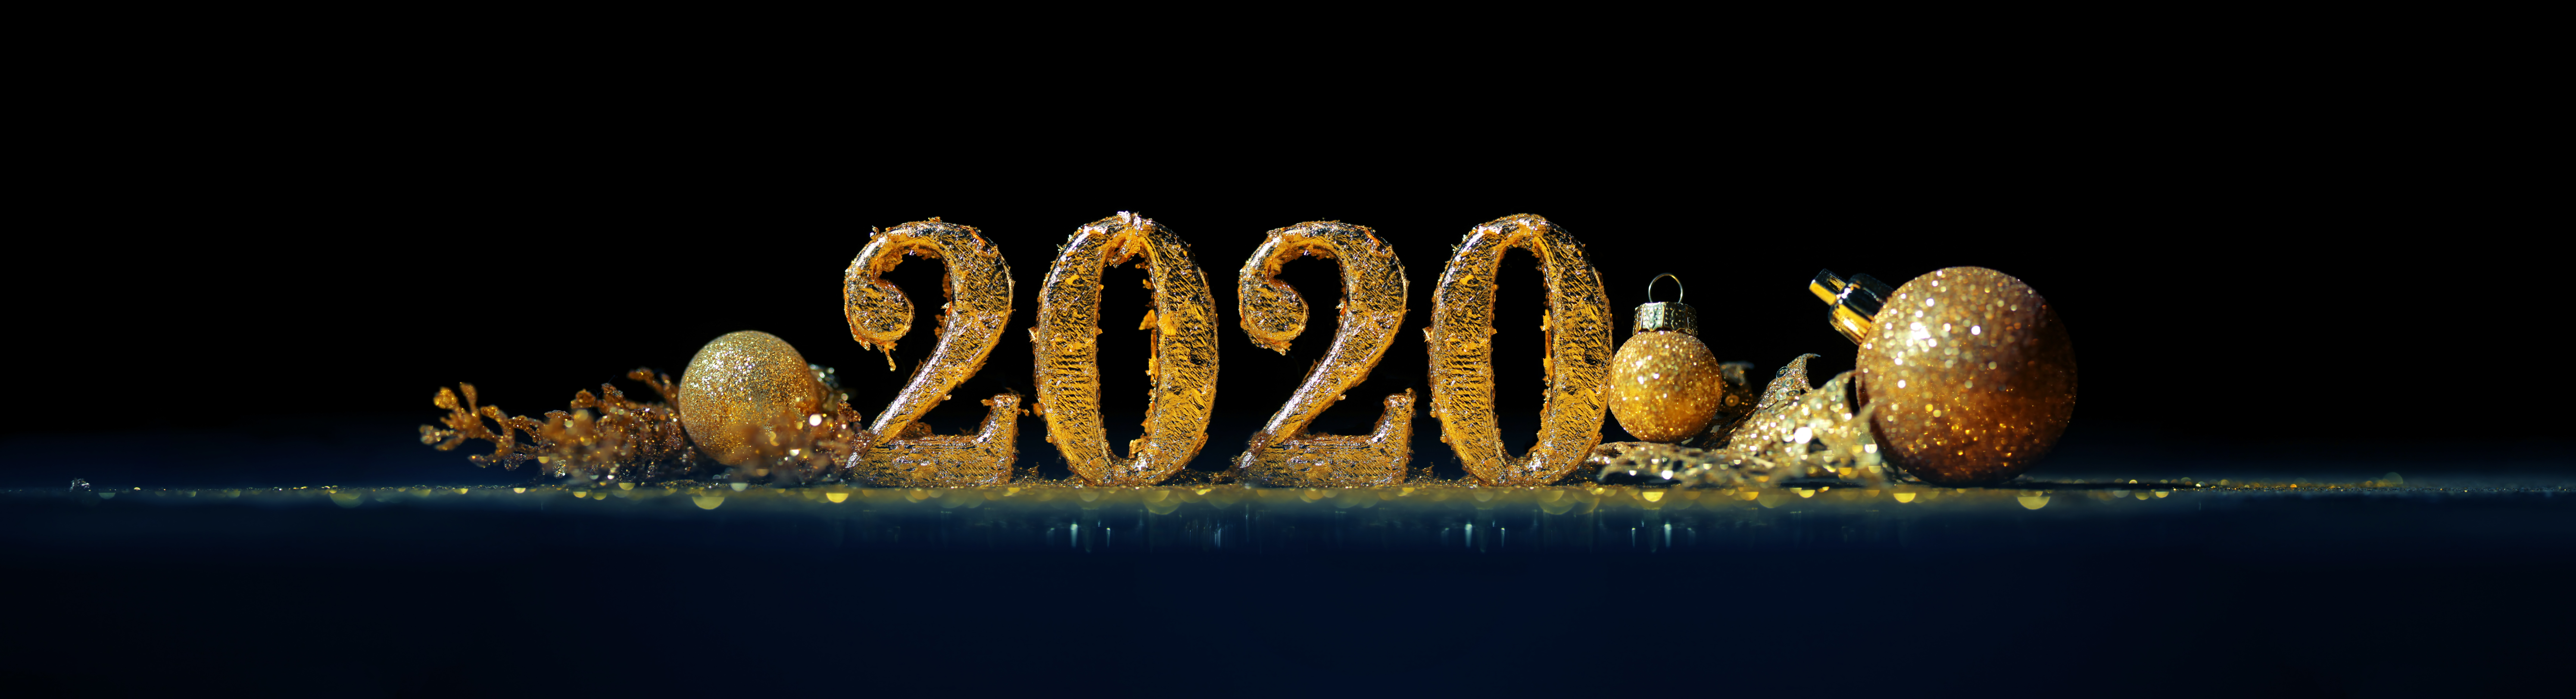 2020 in sparkling gold numbers celebrating the New Year or Christmas with glittering ornaments and decorations